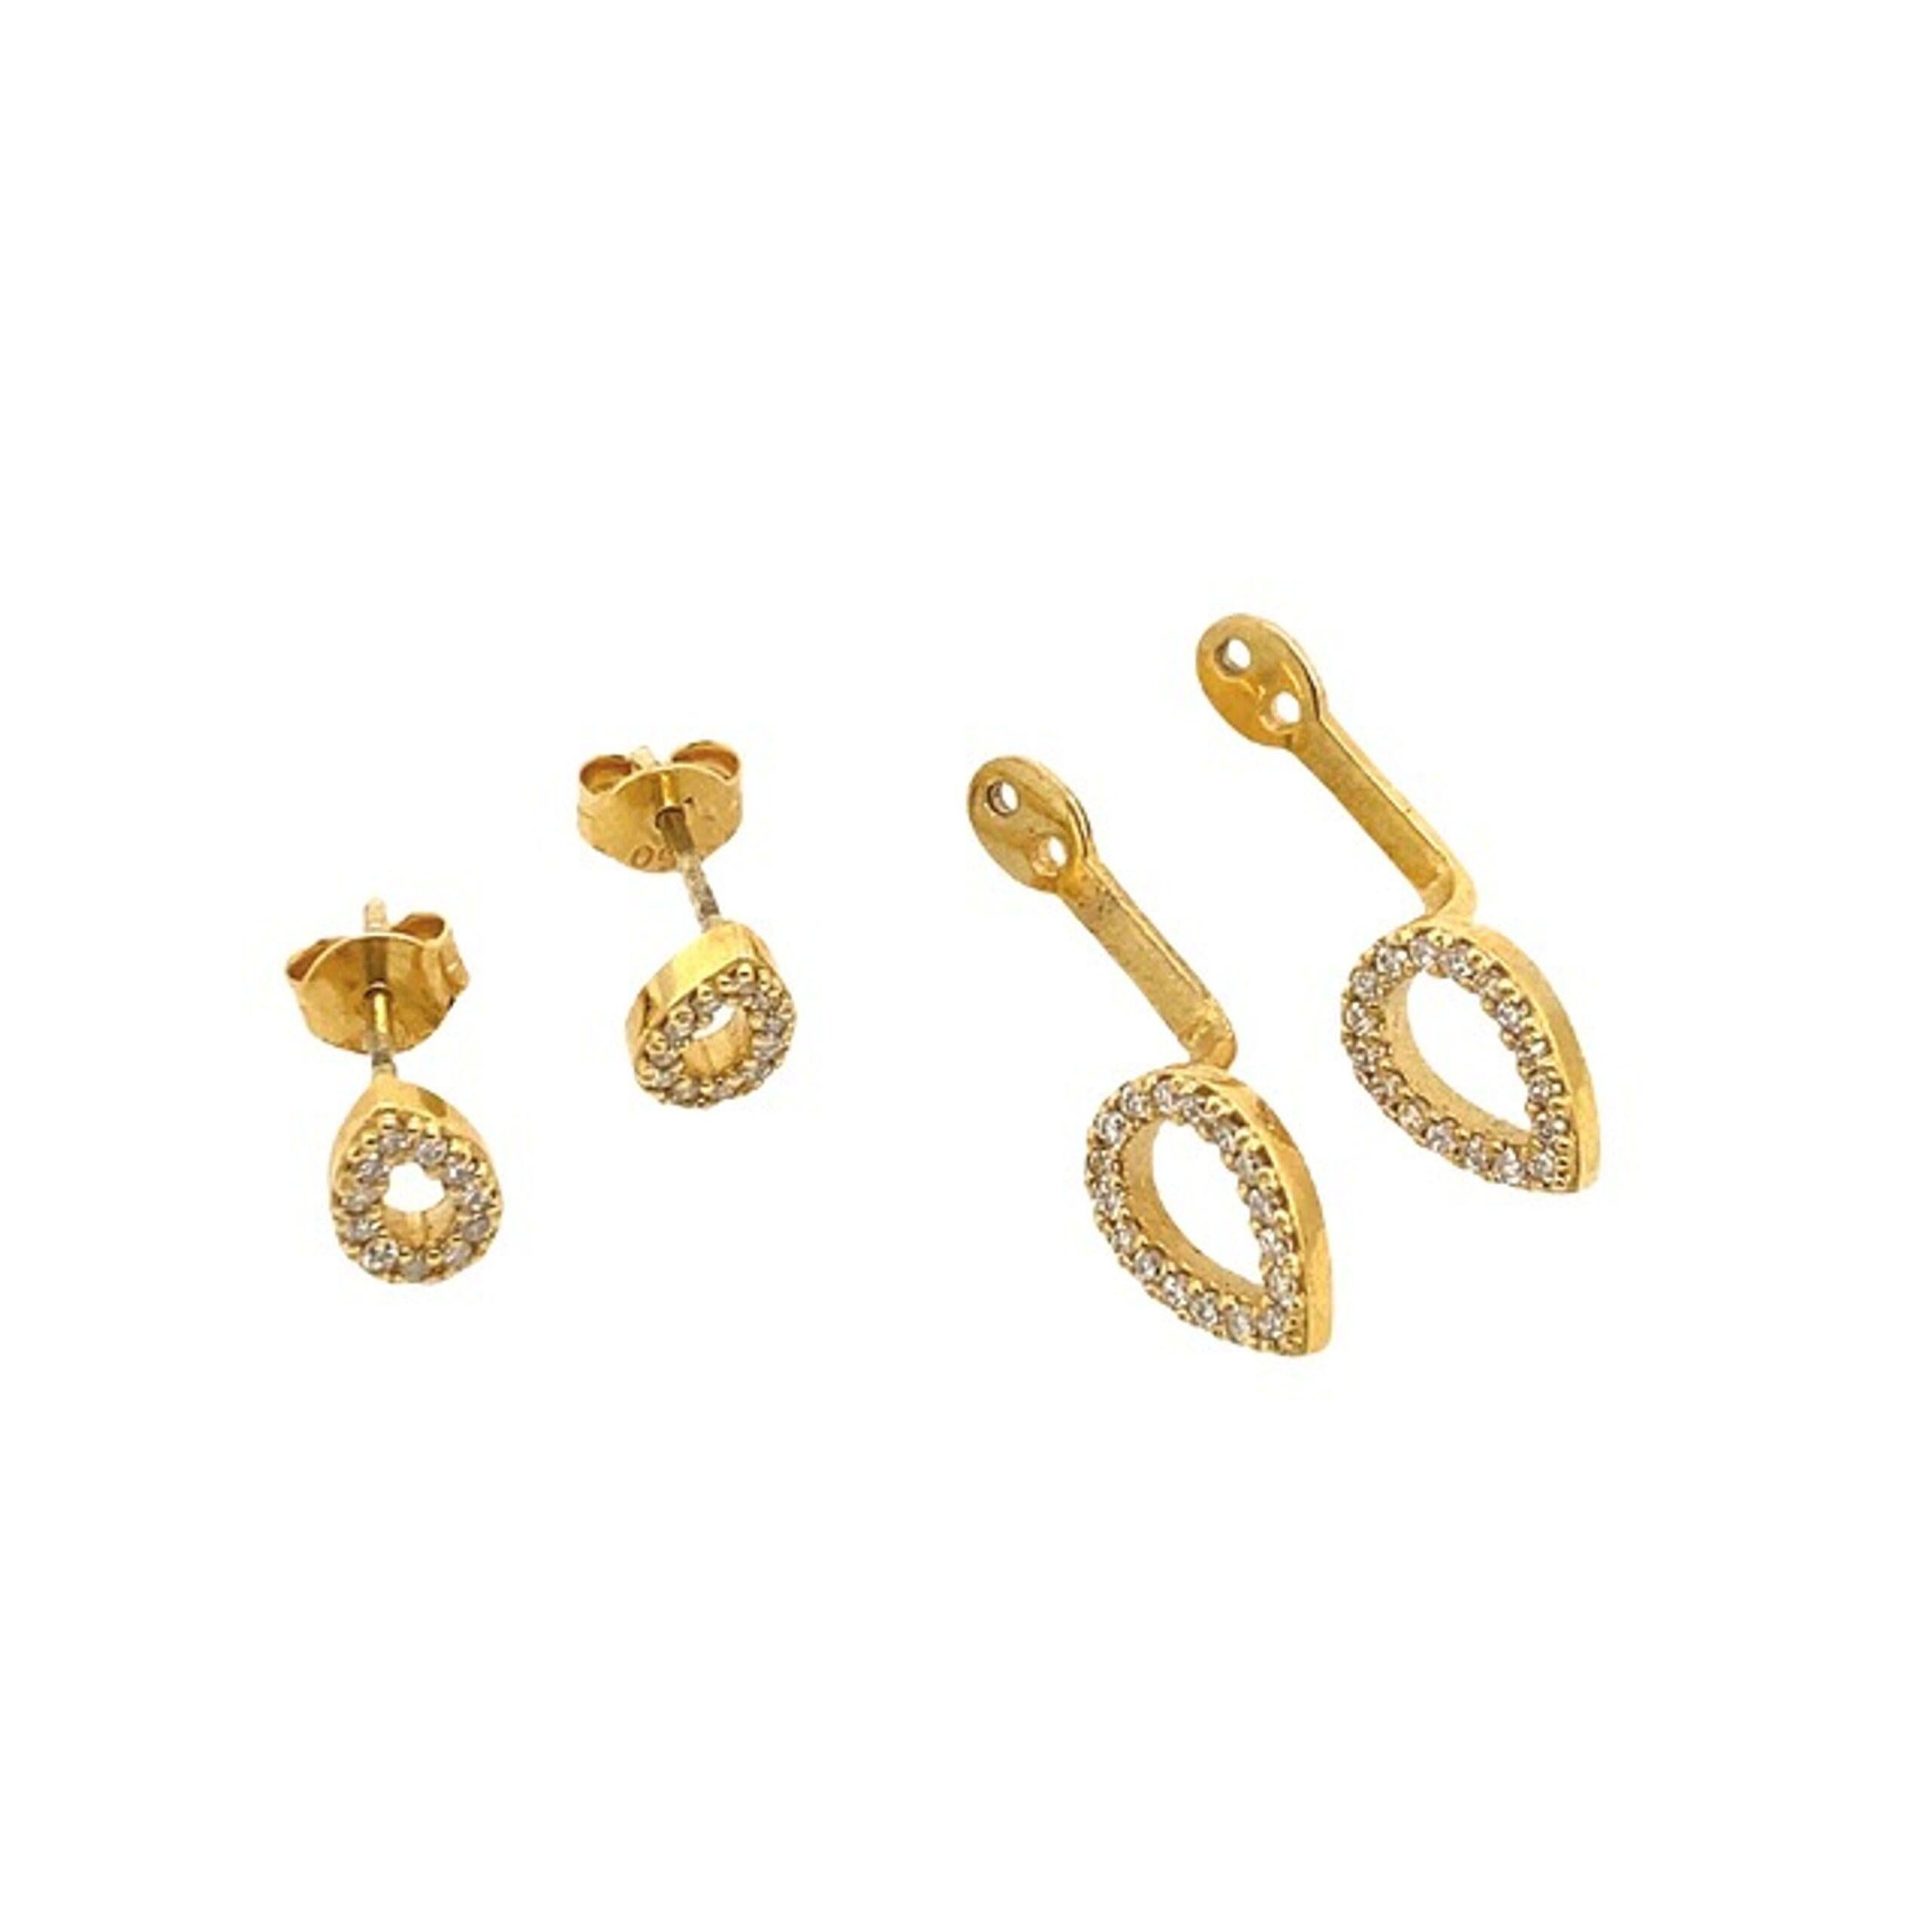 Round Cut New Fine Quality Drops & Studs Earrings Set with Diamonds in 18ct Yellow Gold For Sale